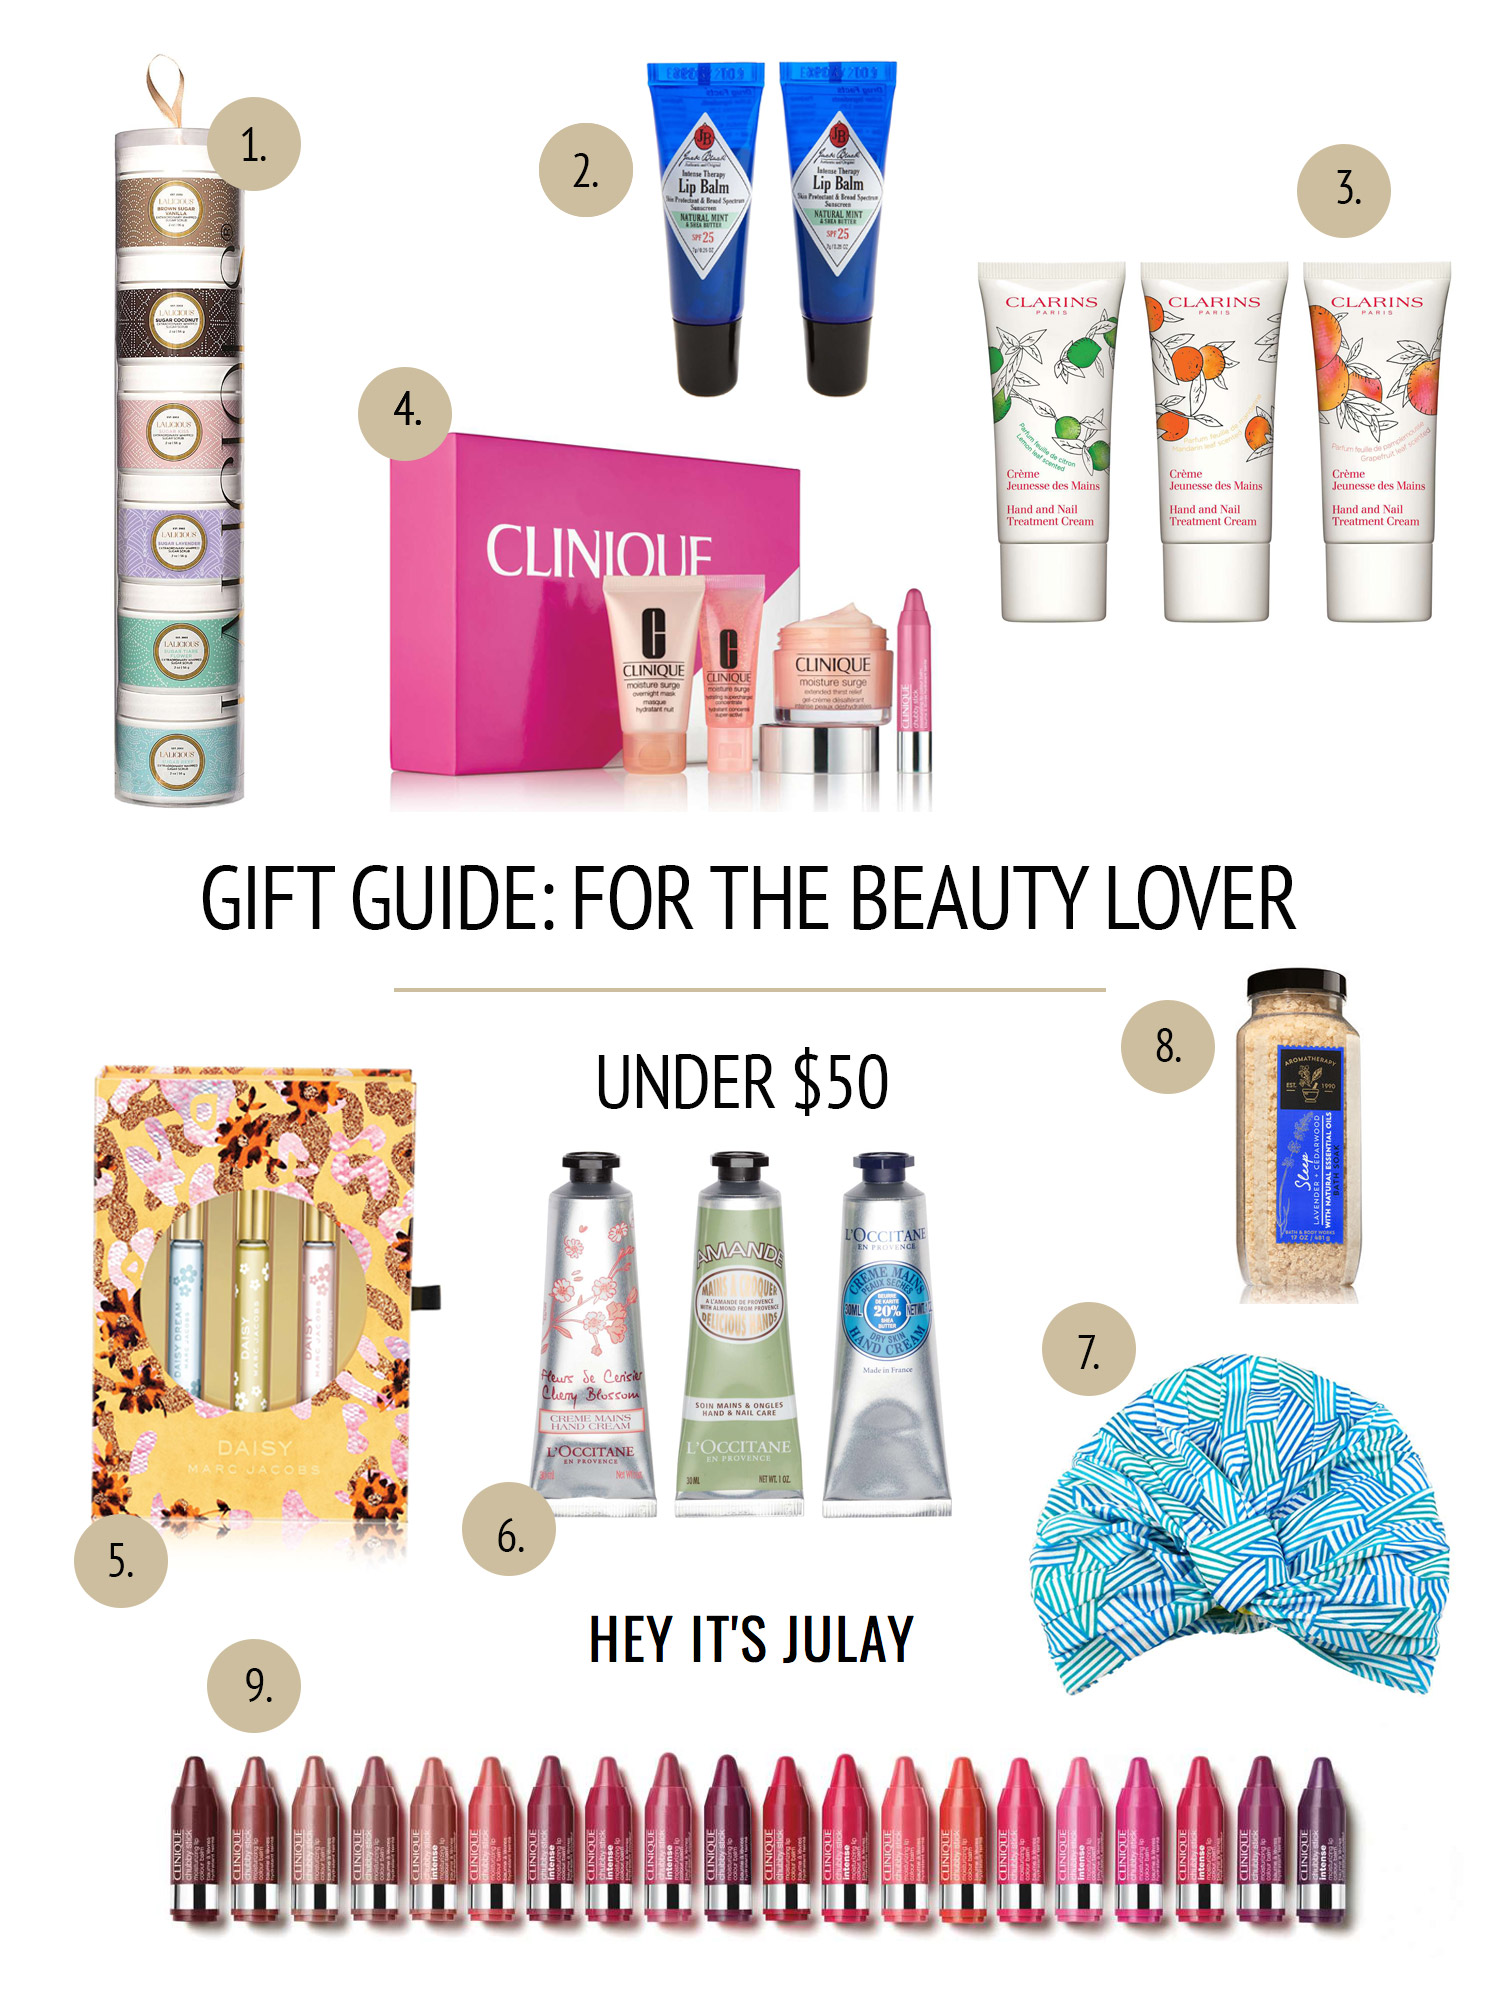 Gift Guide for the Beauty Lover